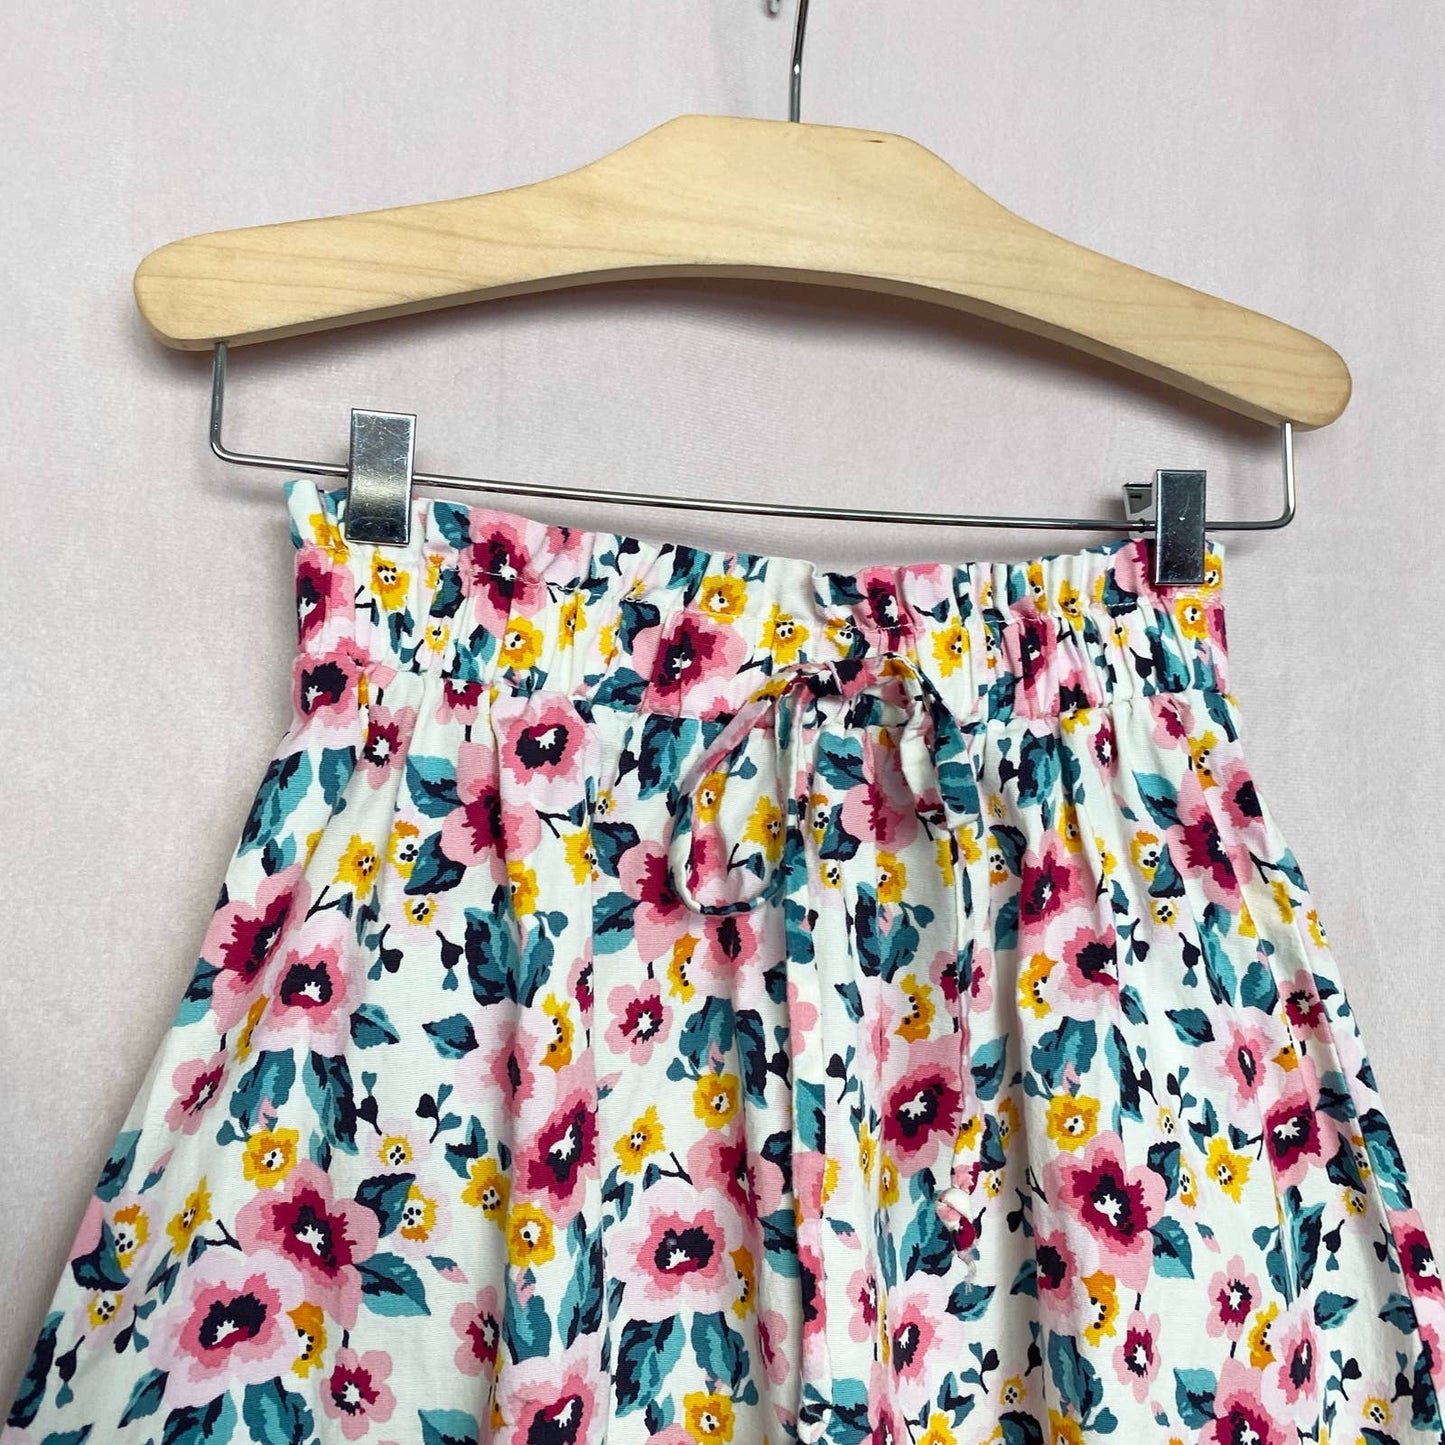 Secondhand City Vibe Floral A-Line Mini Skirt, Size XS